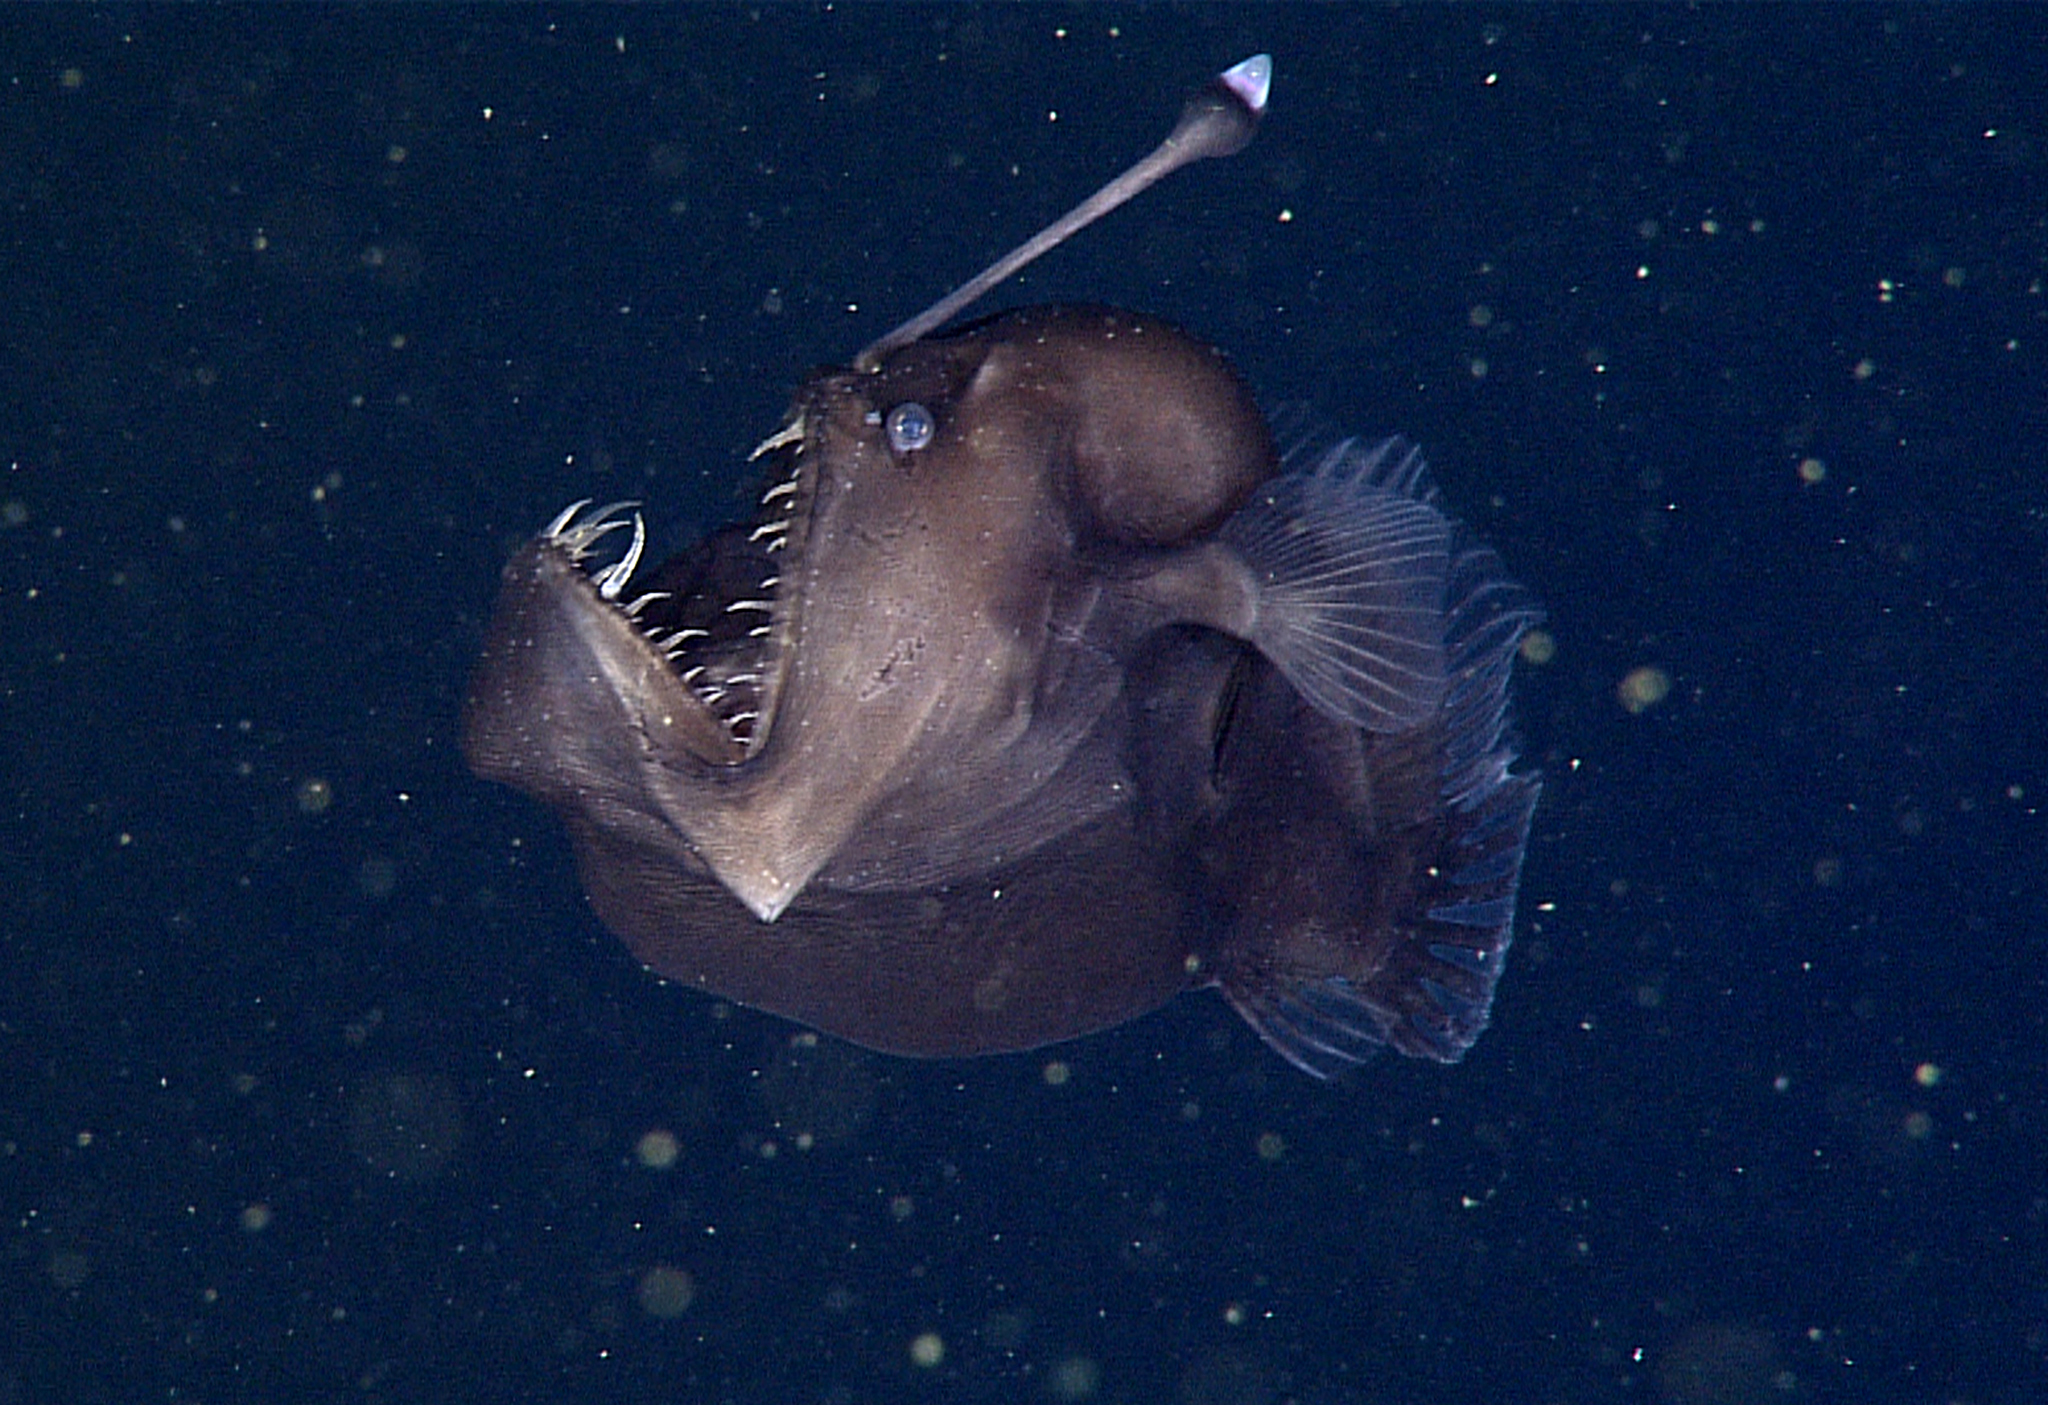 Rare Black Sea Devil Caught on Film for the First Time